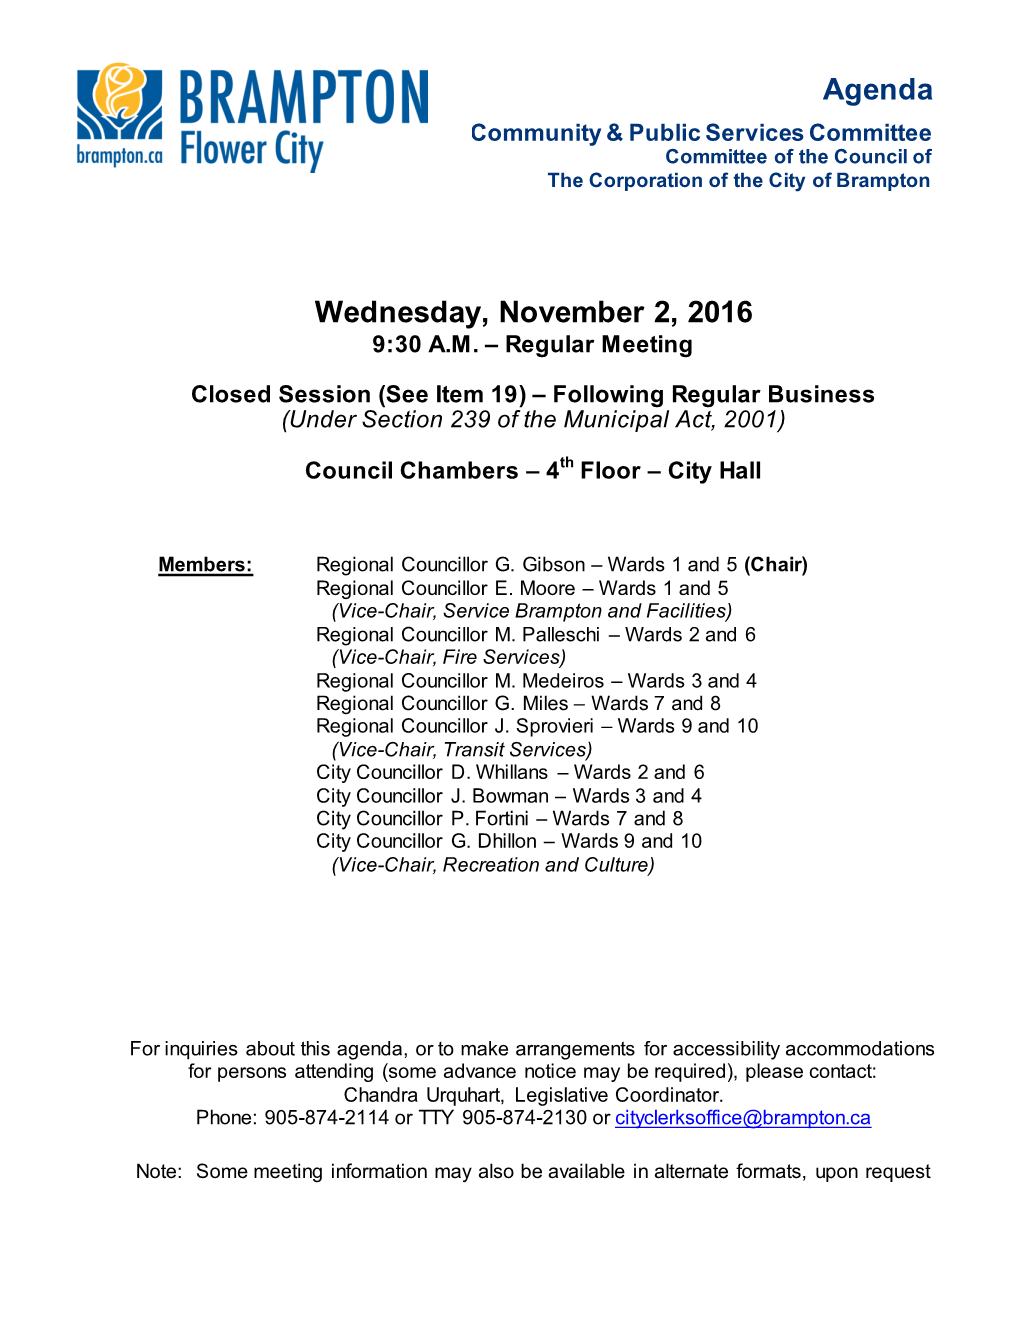 Community & Public Services Committee Agenda for November 2